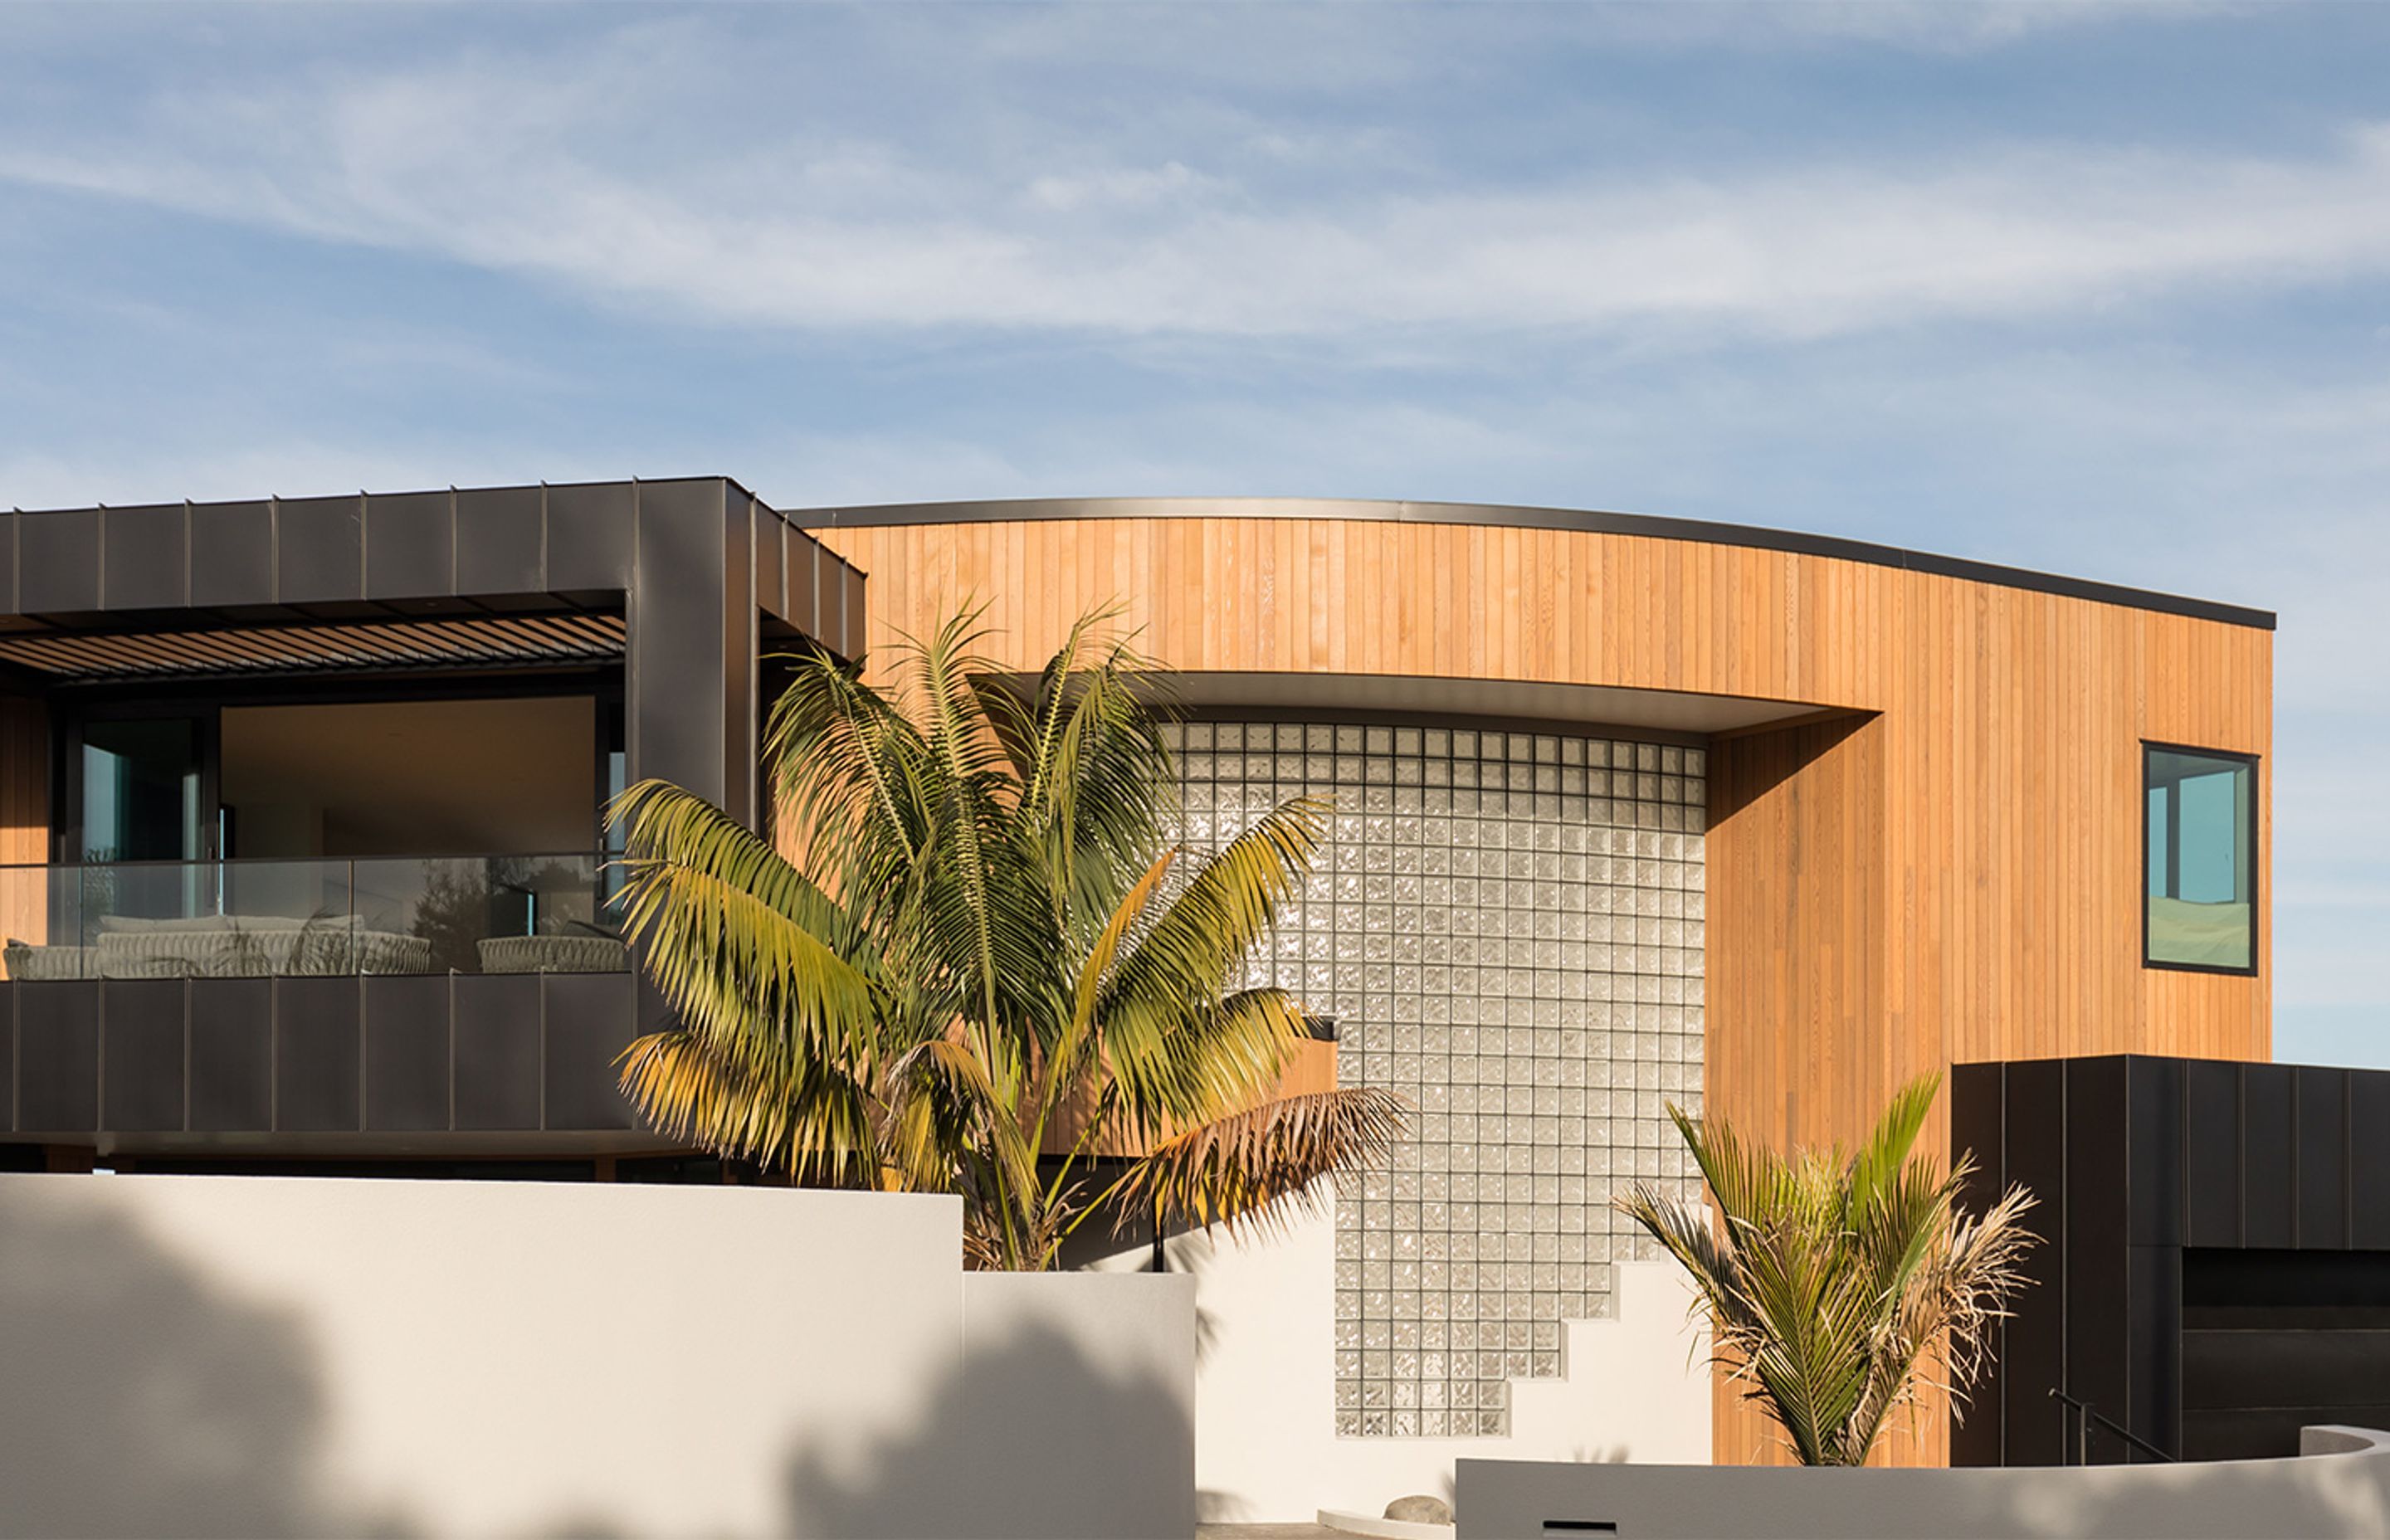 The plaster exterior has been replaced with a combination of vertical cedar and standing seam cladding for a crisp, contemporary look—only the glass bricks give a nod to the home's origins.